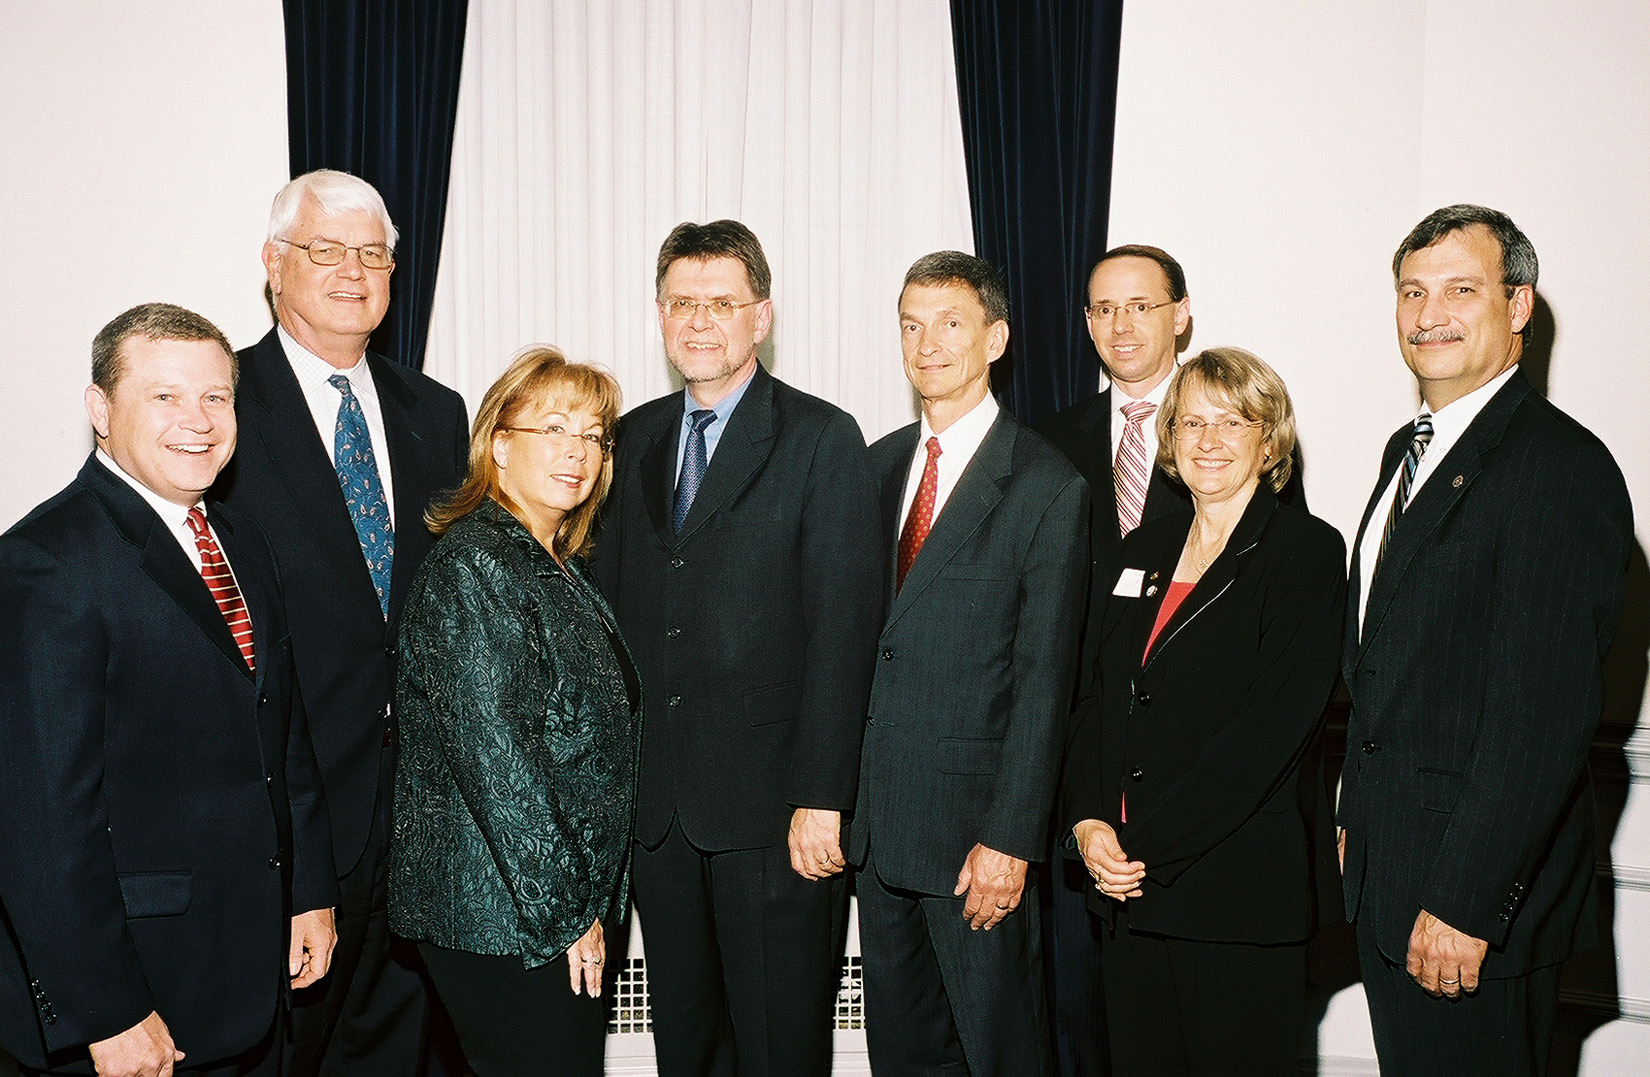 Left to Right: Lawrence Wasden, Idaho Attorney General; Robert DeMuro, Inspector in Charge, Financial Crimes Group, U.S. Postal Inspection Service; Andrea Rosen, Deputy Commissioner of Competition, Competition Bureau Canada; William E. Kovacic, Federal Trade Commission Chairman; Kenneth Jost, Deputy Director, Office of Consumer Litigation, U.S. Department of Justice; Rod J. Rosenstein, U.S. Attorney of the District of Maryland; Joan MacPherson, Senior Competition Law Officer, Competition Bureau Canada; Greg Holley, Deputy Assistant Inspector General for Investigations, Treasury Inspector General for Tax Administration